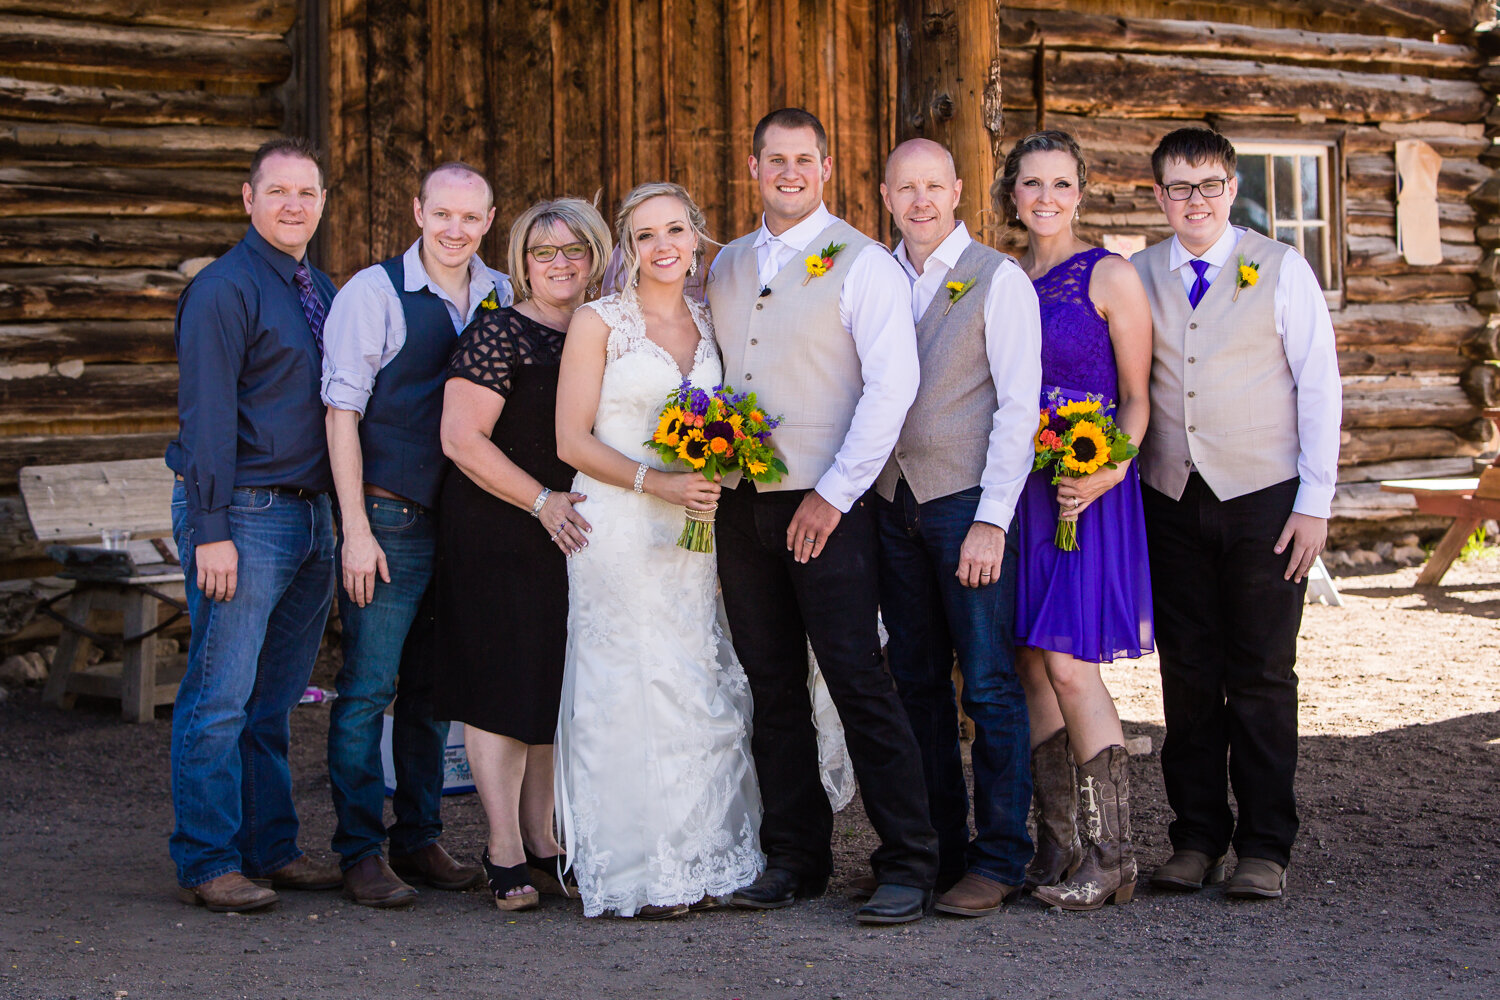  Family formals.&nbsp;Wedding at The barn at Evergreen Memorial. Photographed by JMGant Photography. 